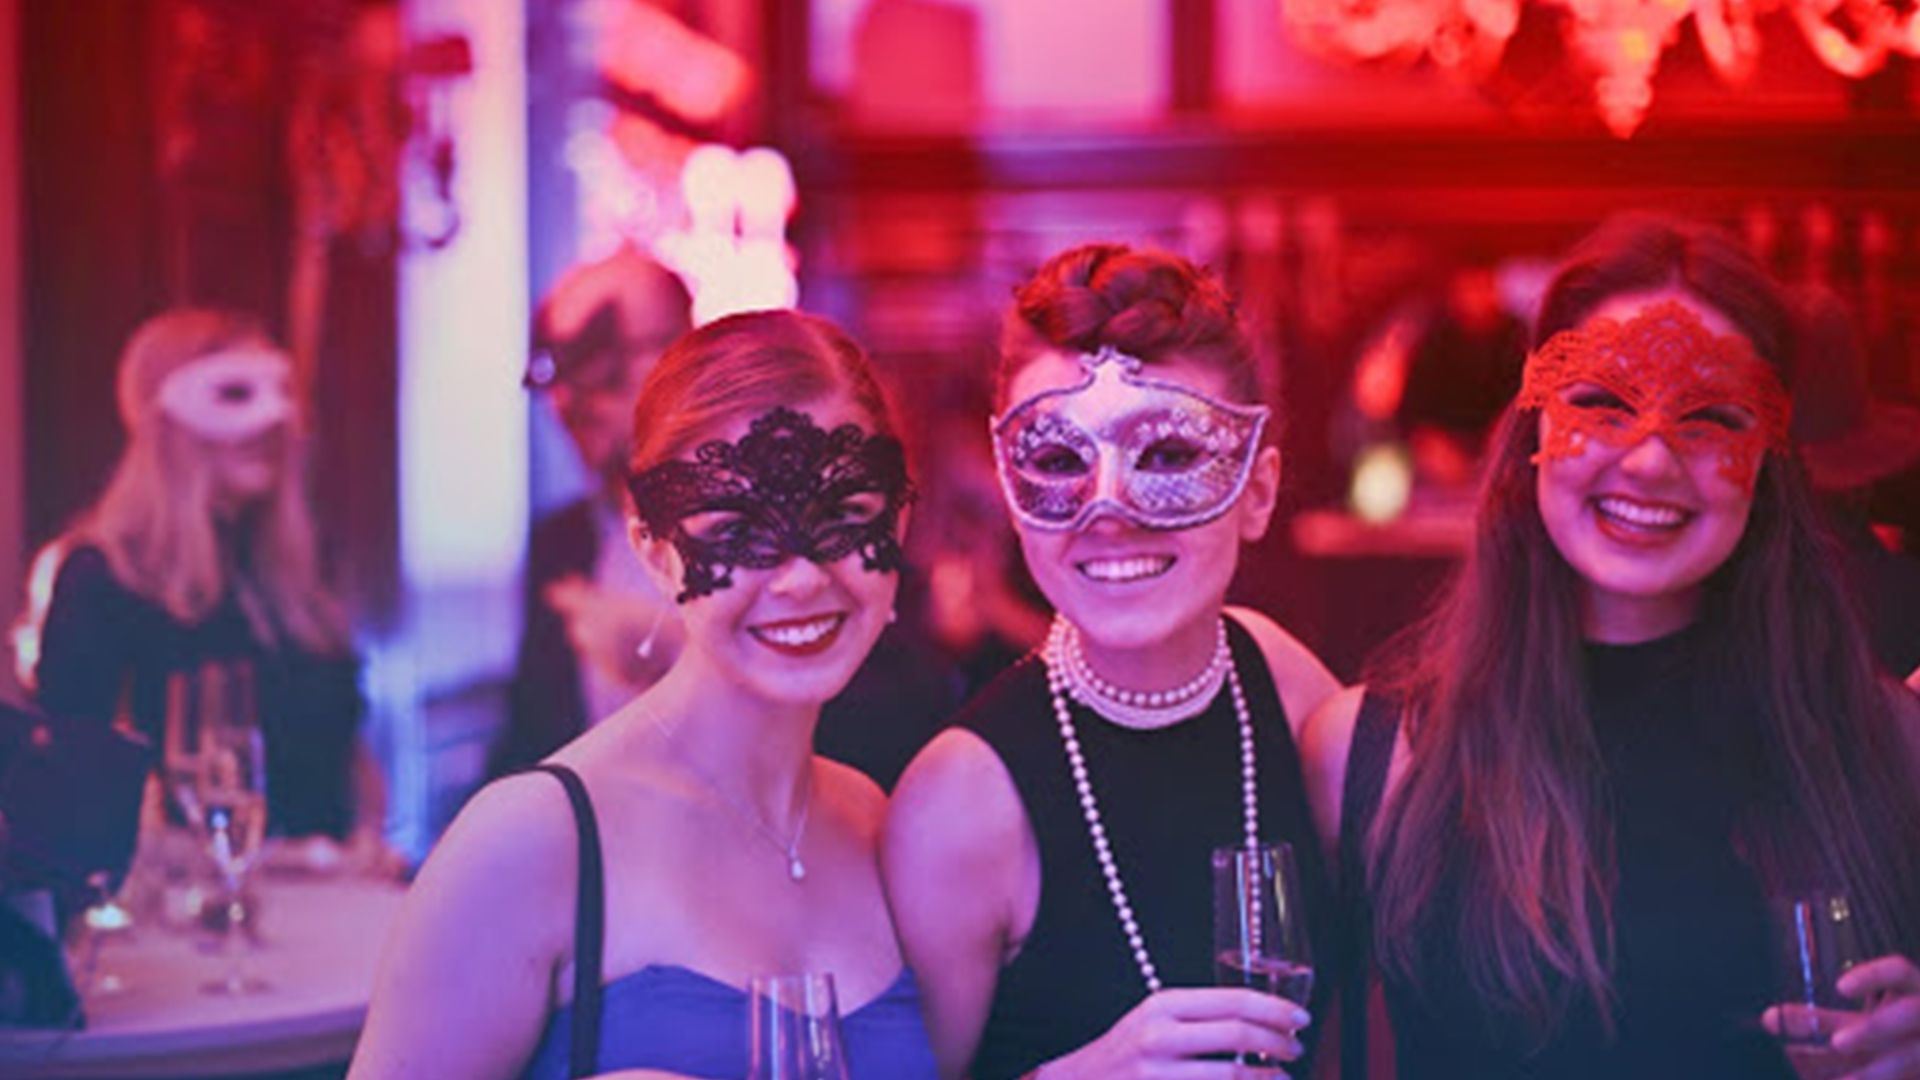 Creative Party Planning With a Masquerade Party